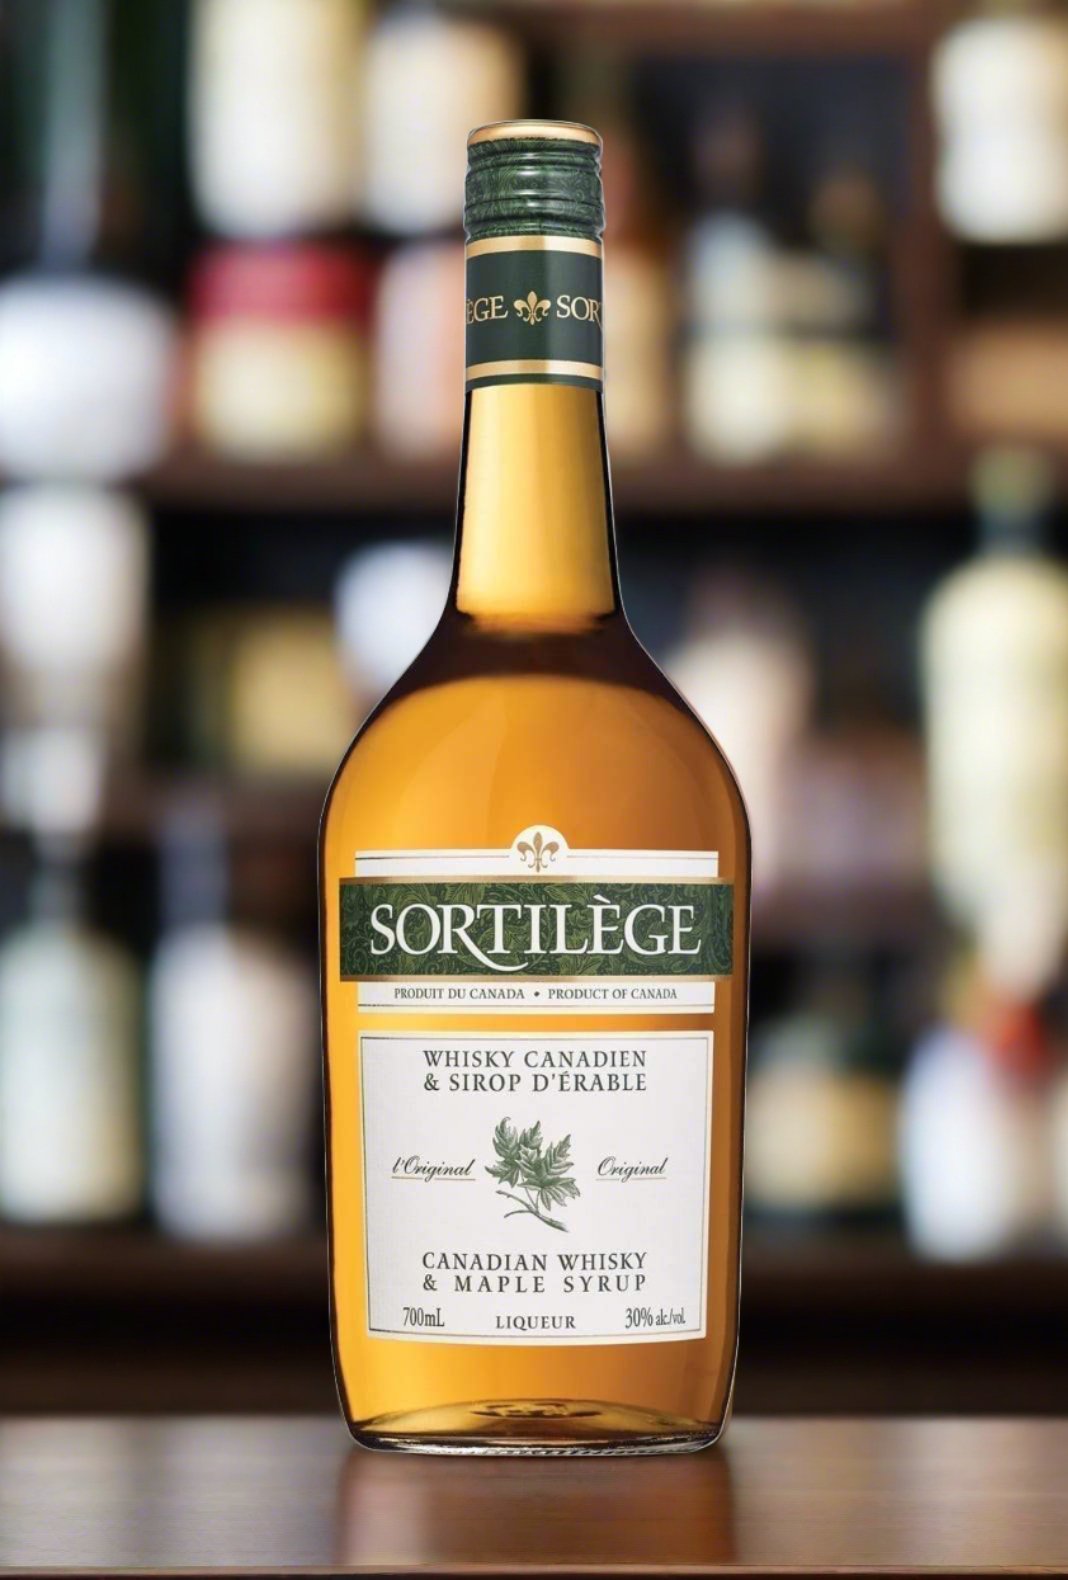 Sortilege Canadian Whisky and Maple Syrup 30% 700ml | Whisky | Shop online at Spirits of France